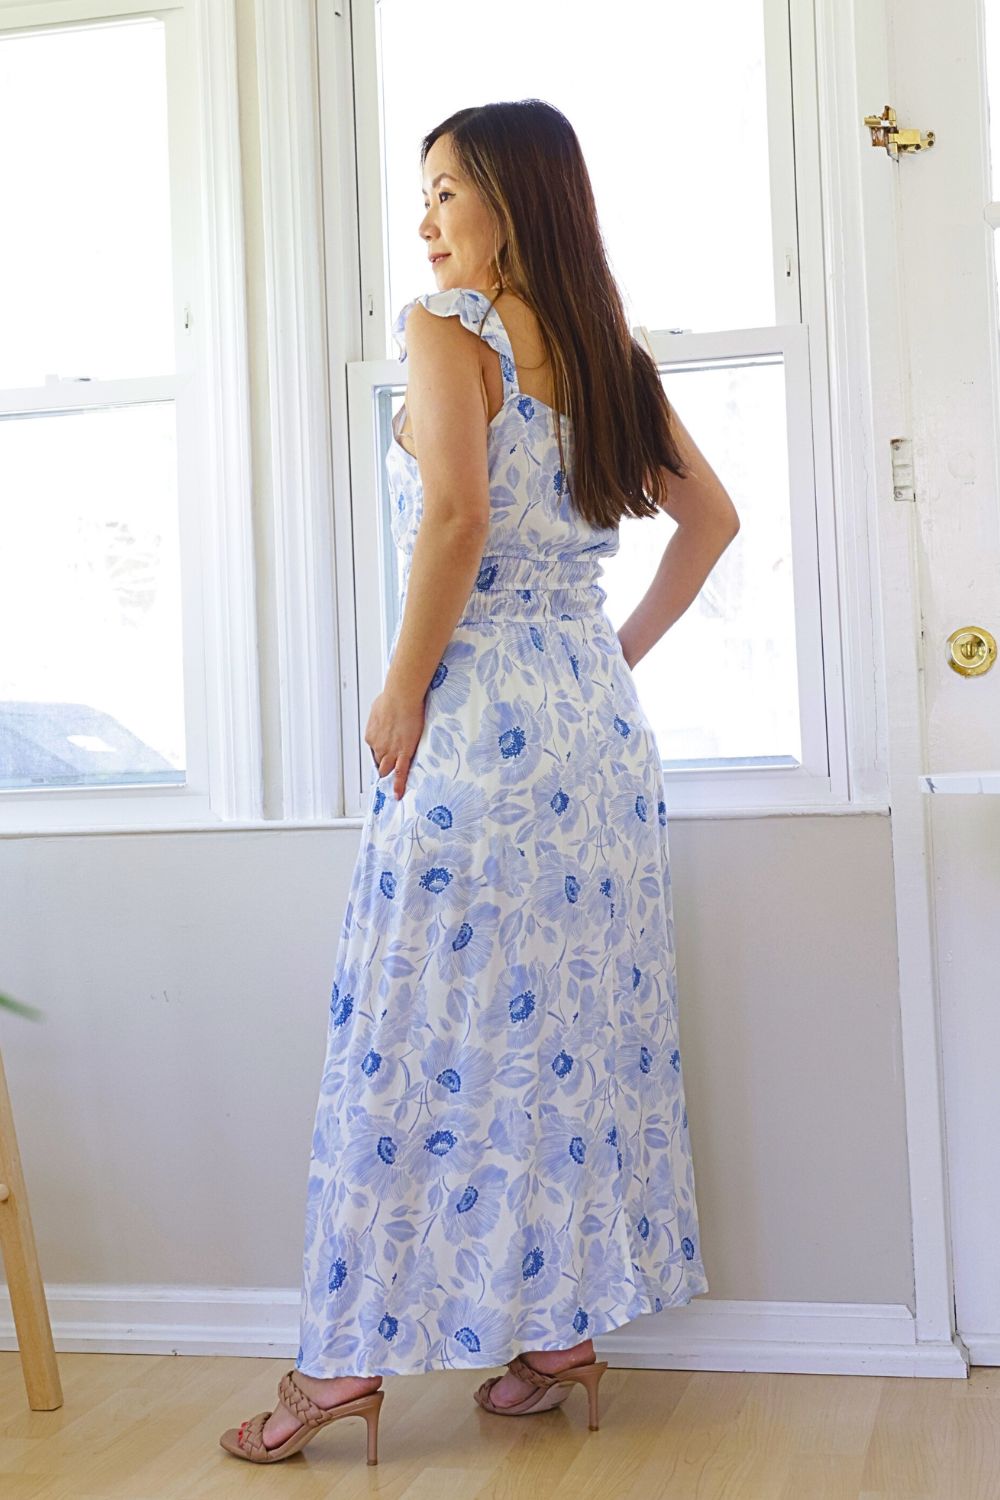 white dress with blue flowers